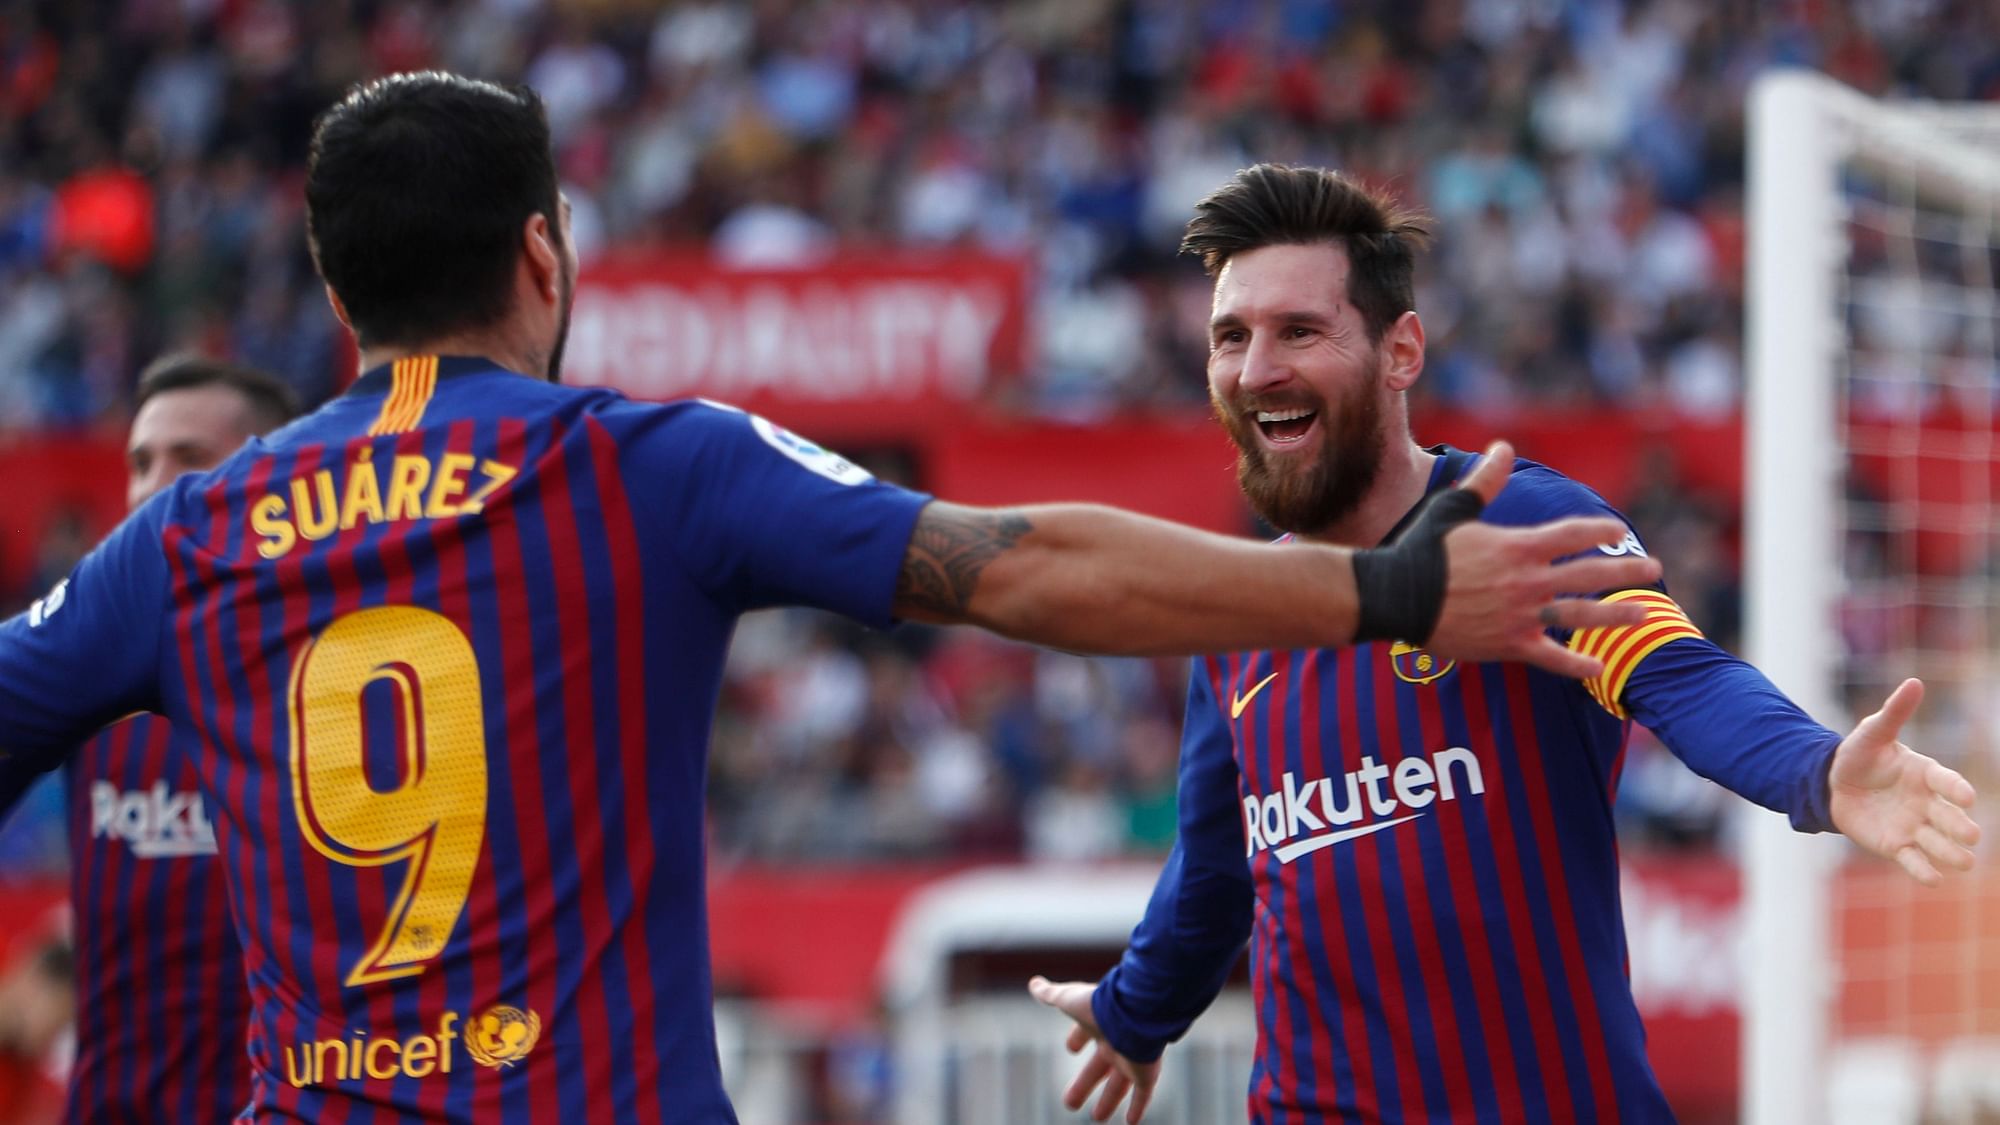 Lionel Messi scored a hat-trick and set up a final goal by Luis Suarez to earn Spanish league leader Barcelona a 4-2 comeback win at Sevilla.